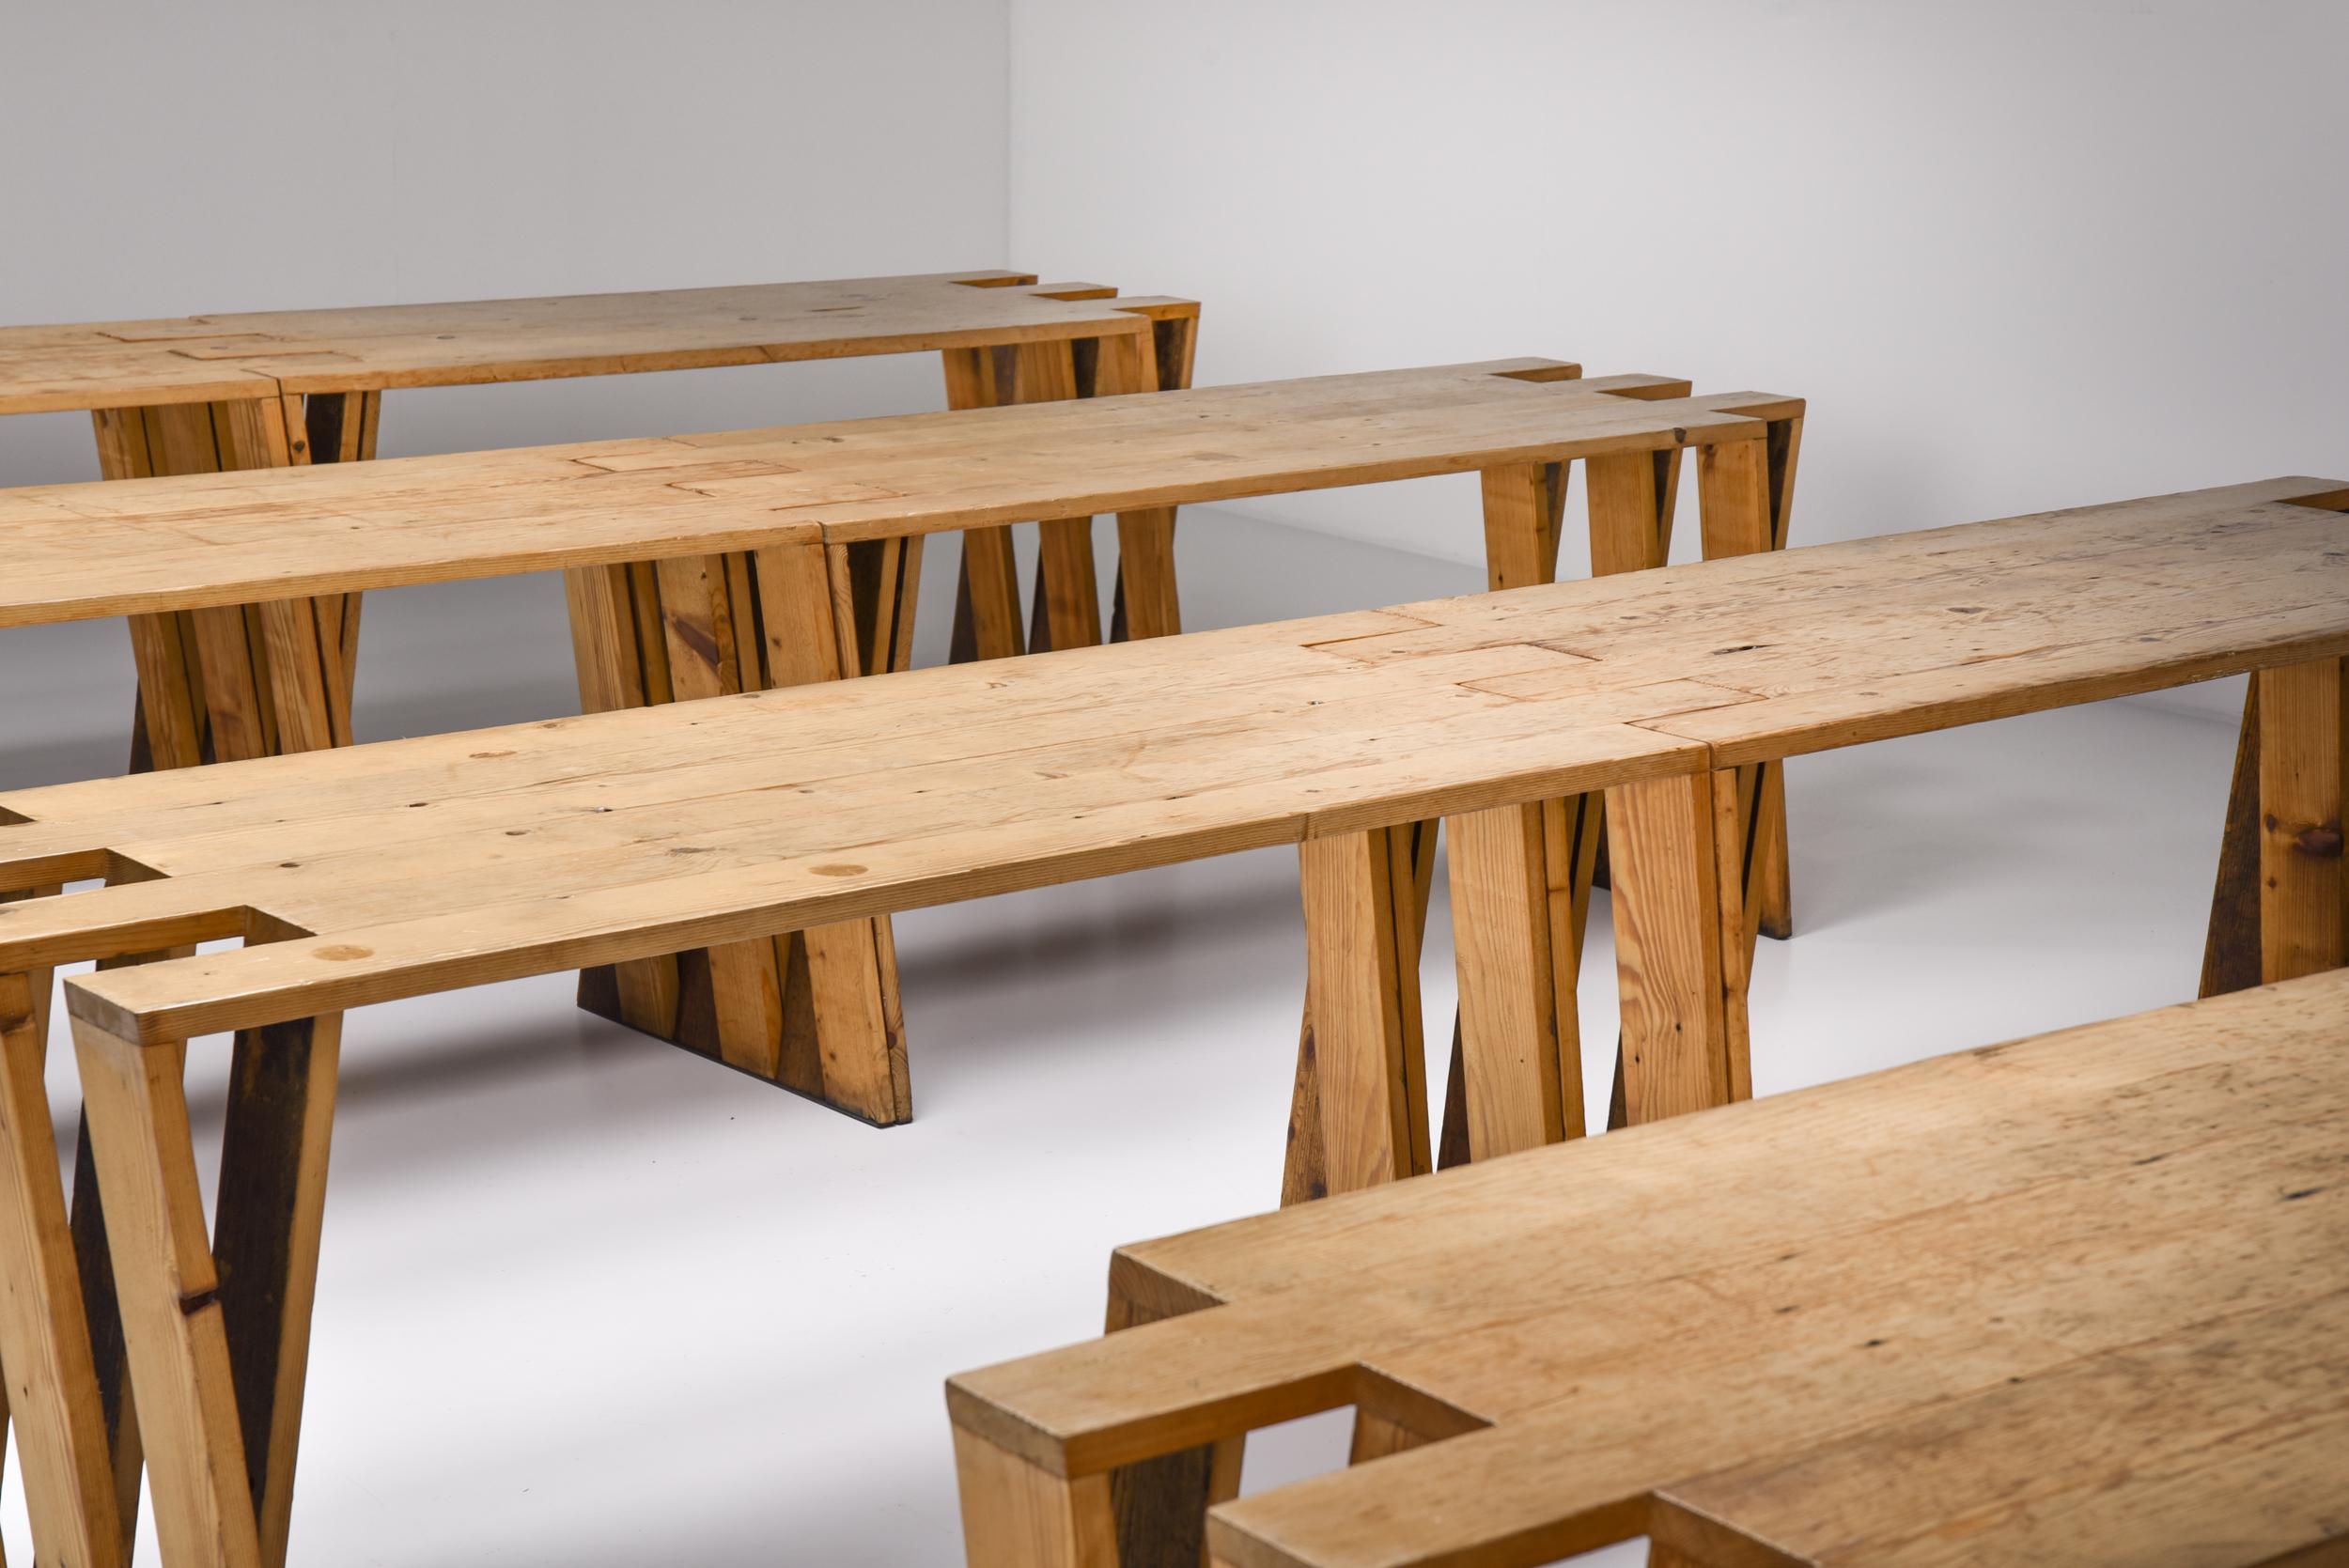 Dutch Pine Modular Puzzle dining tables. 

We have eight of these unique tables available.
These tables can be clicked together like a puzzle and offer an elegant finish.